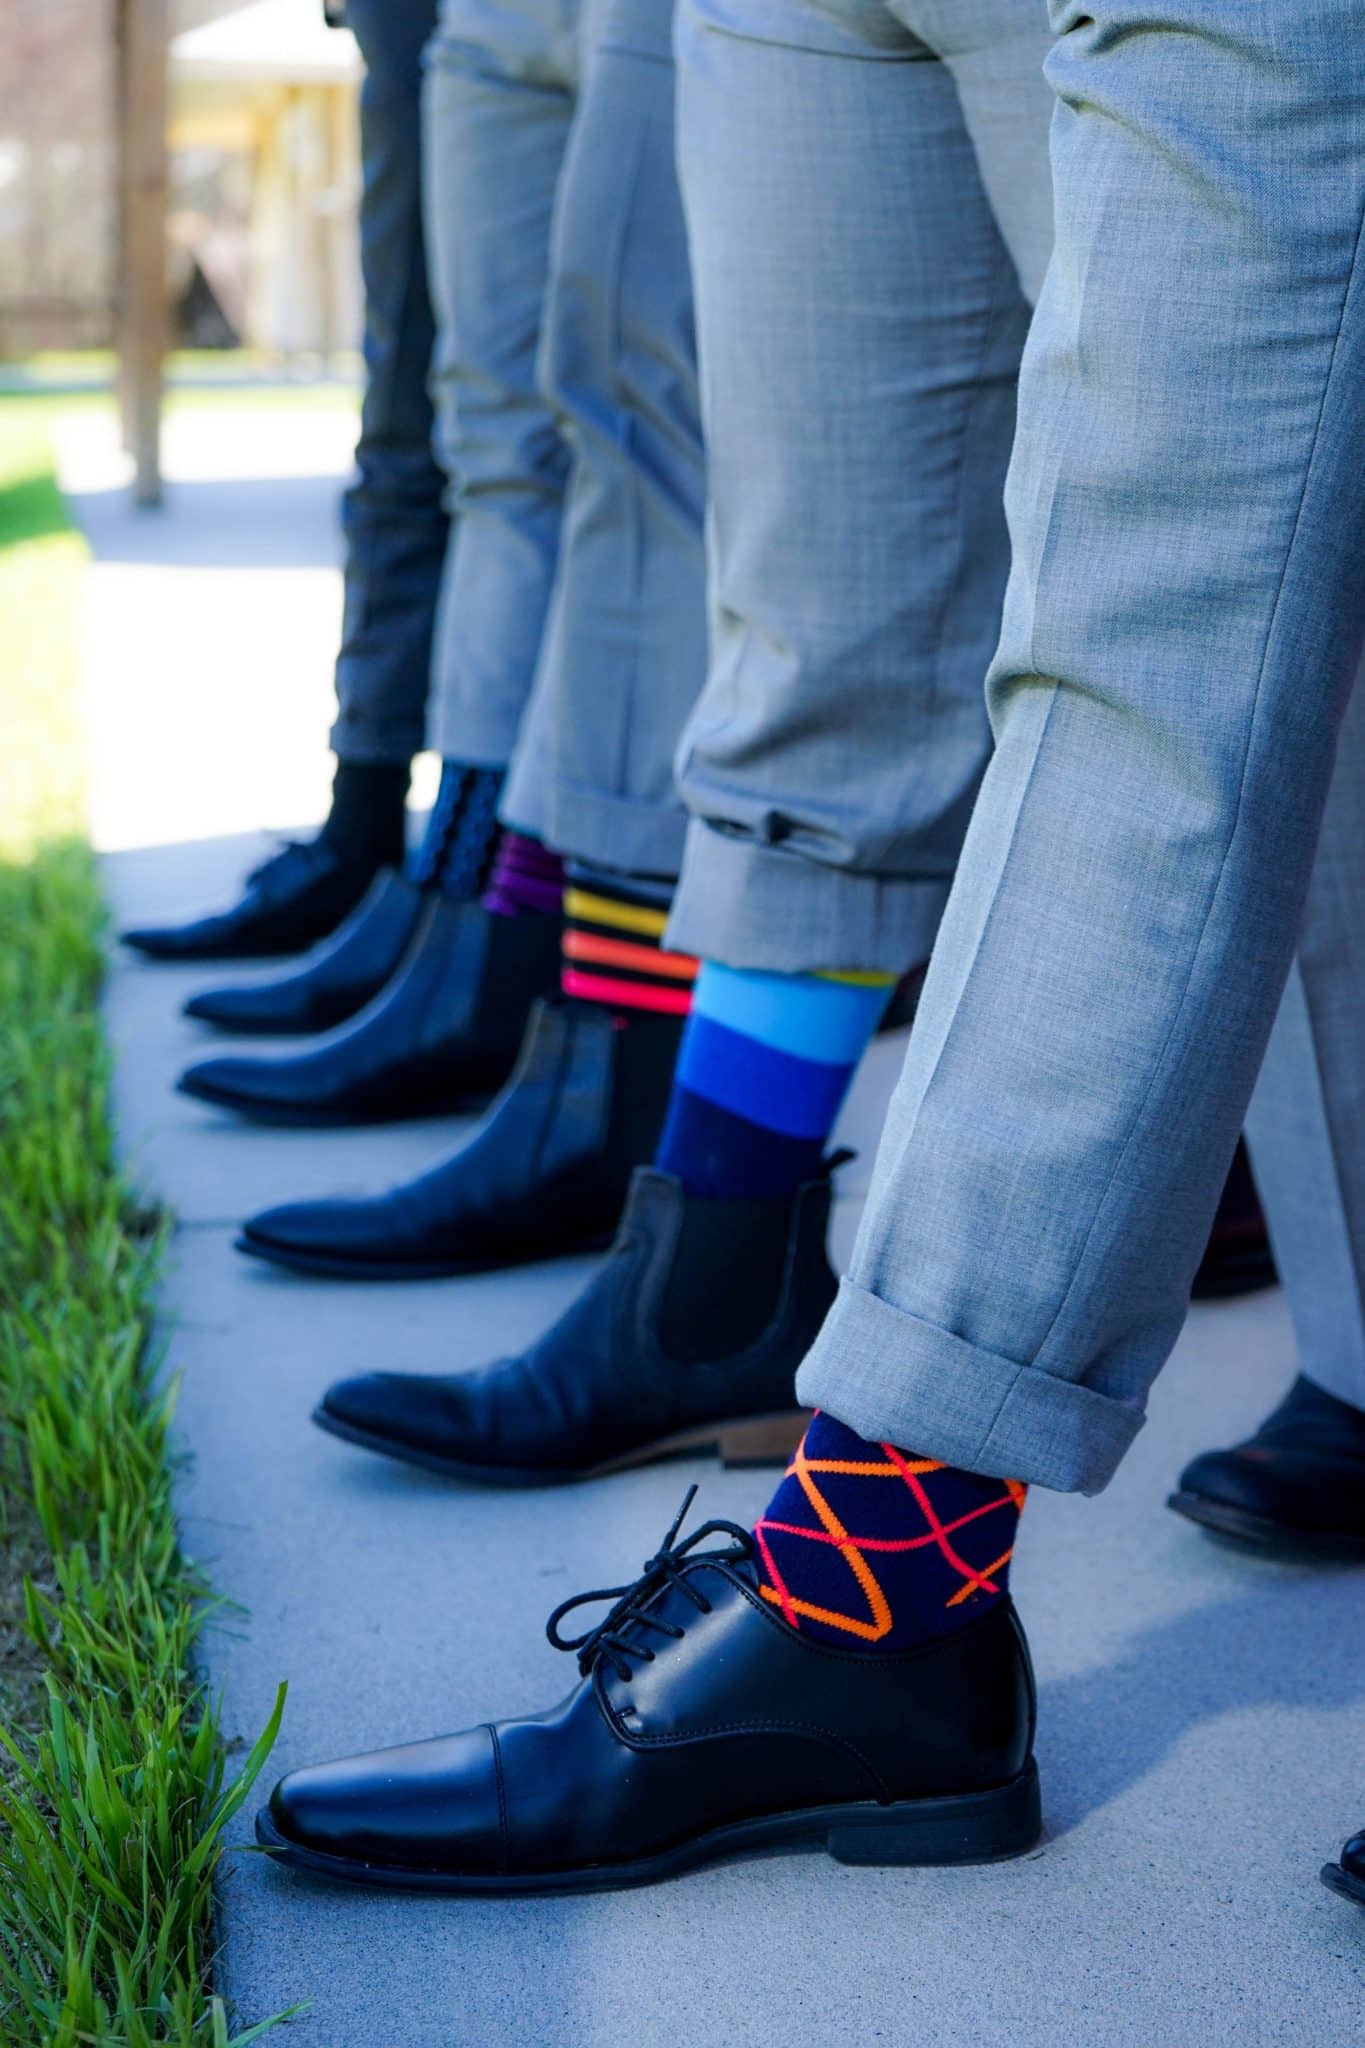 groom and groomsmen show off their black wedding day shoes and boots